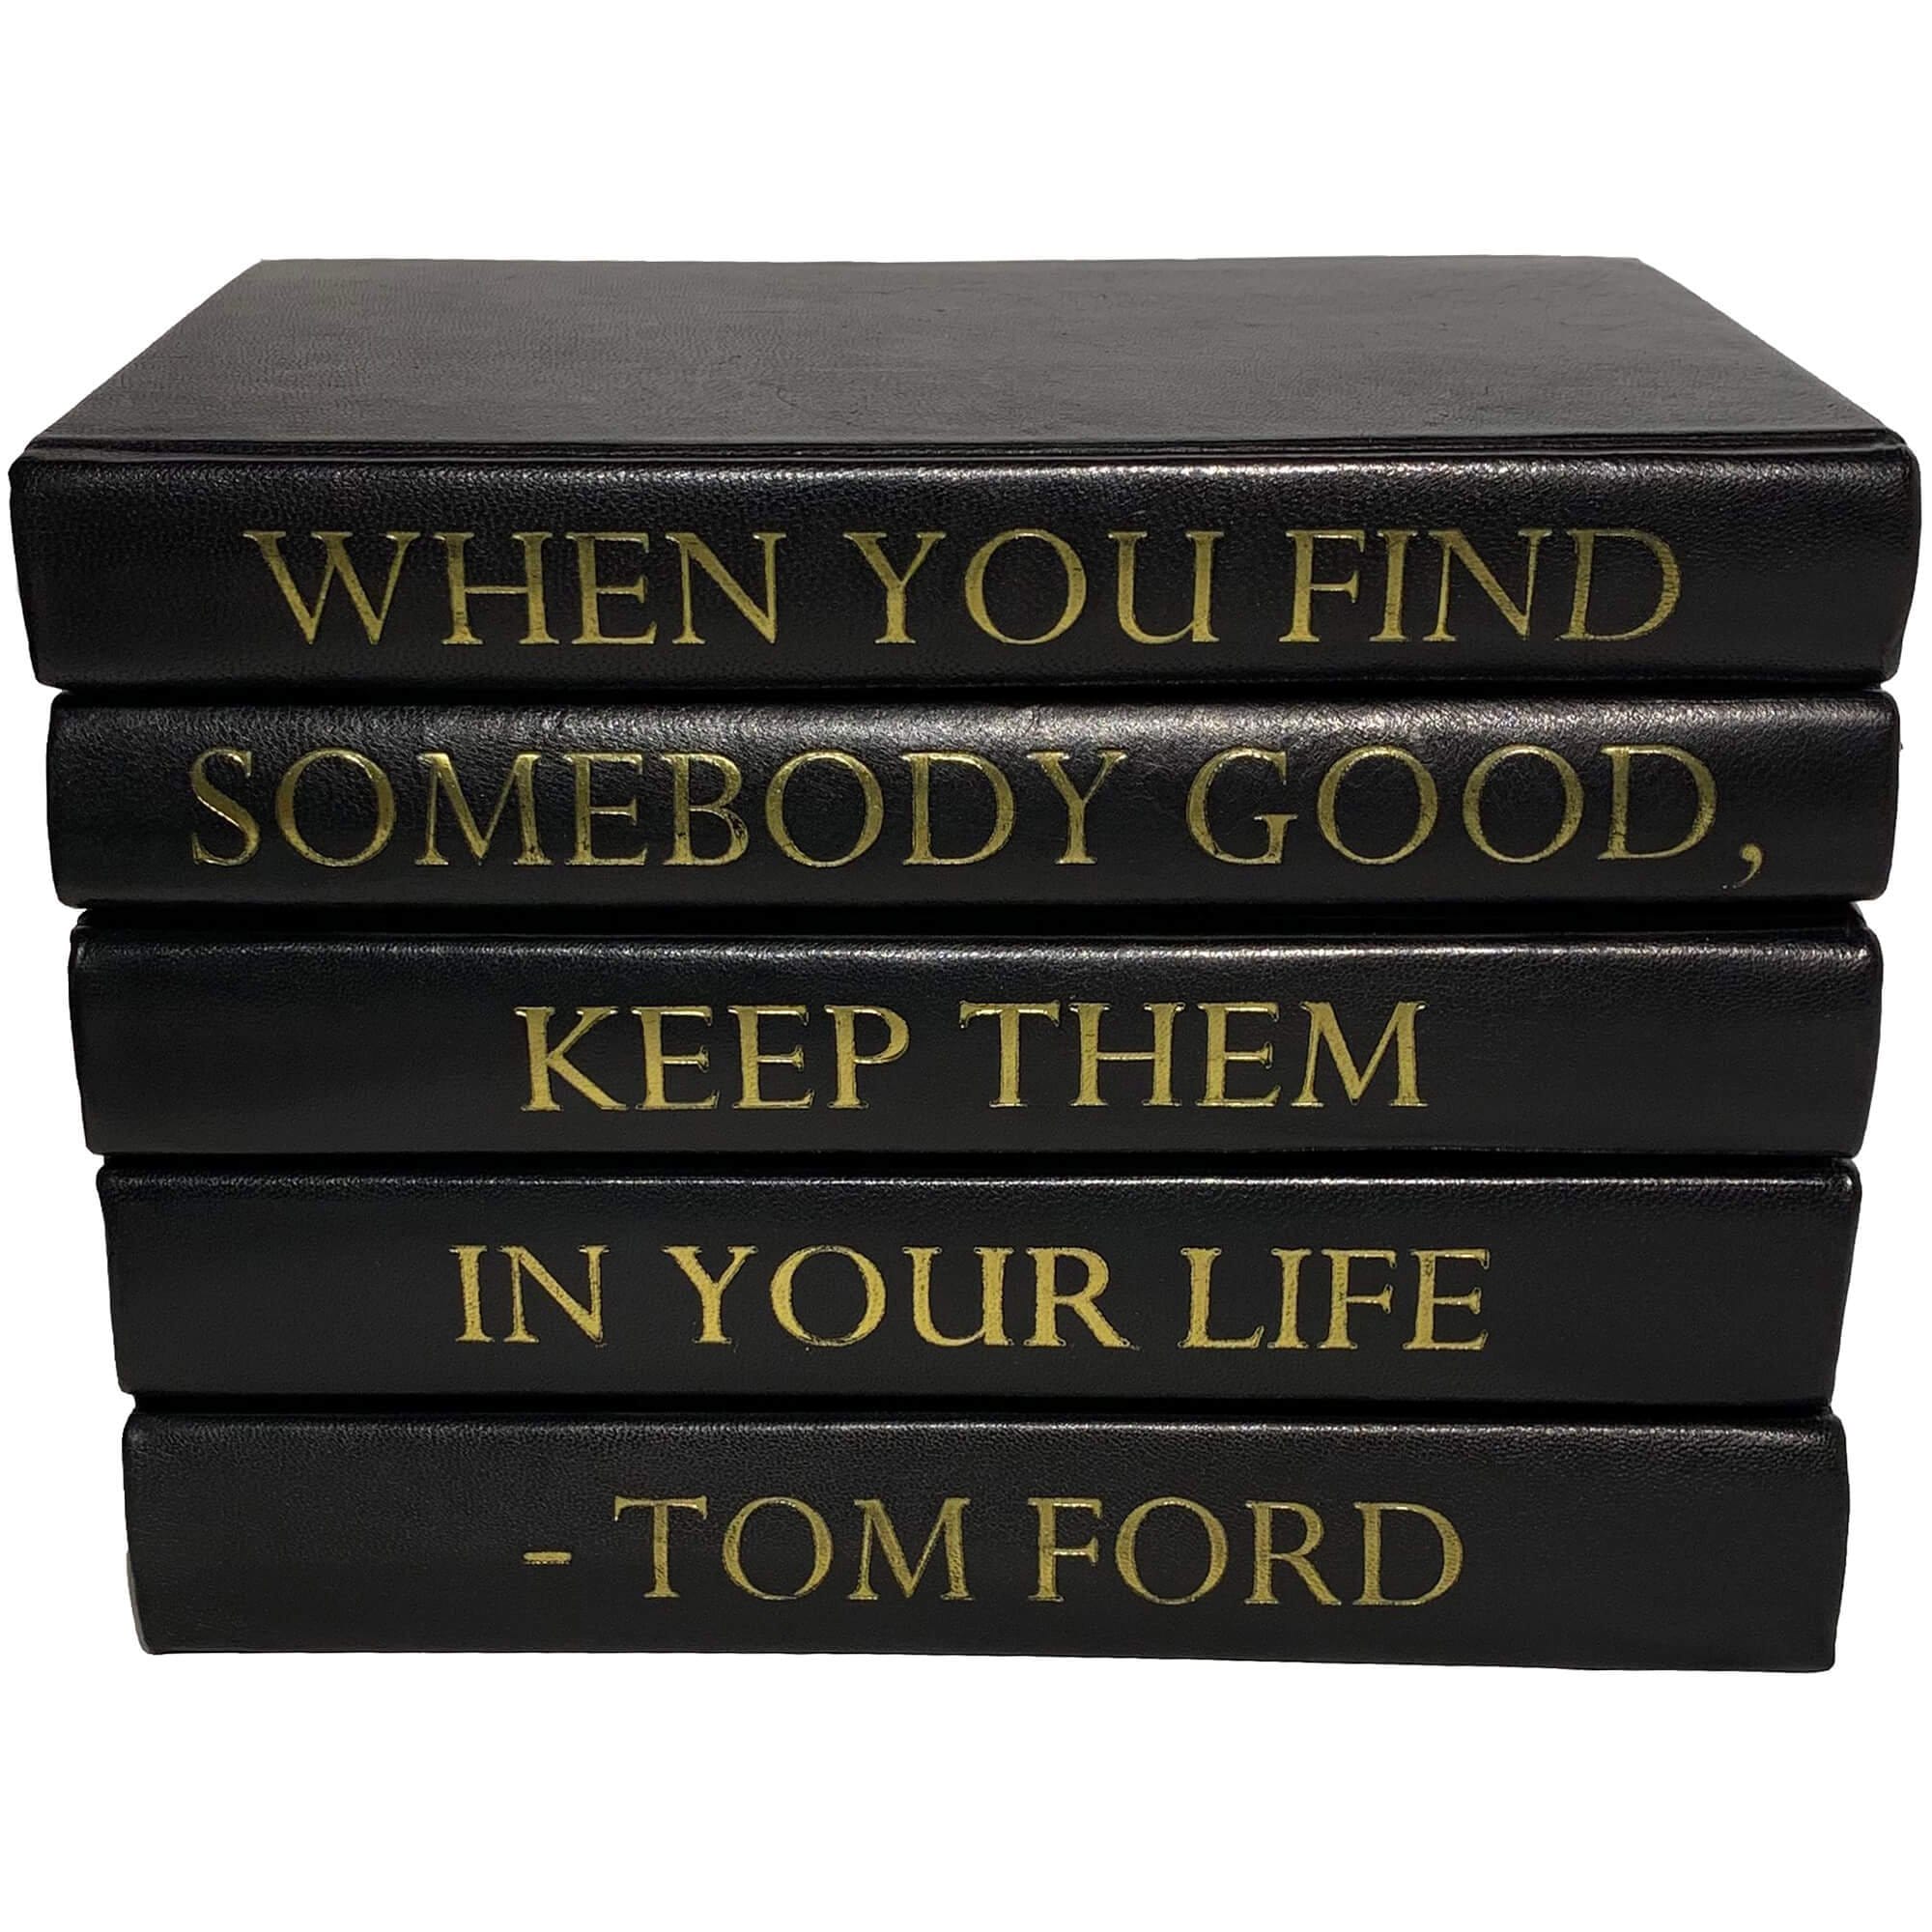 Tom Ford - Brands Book